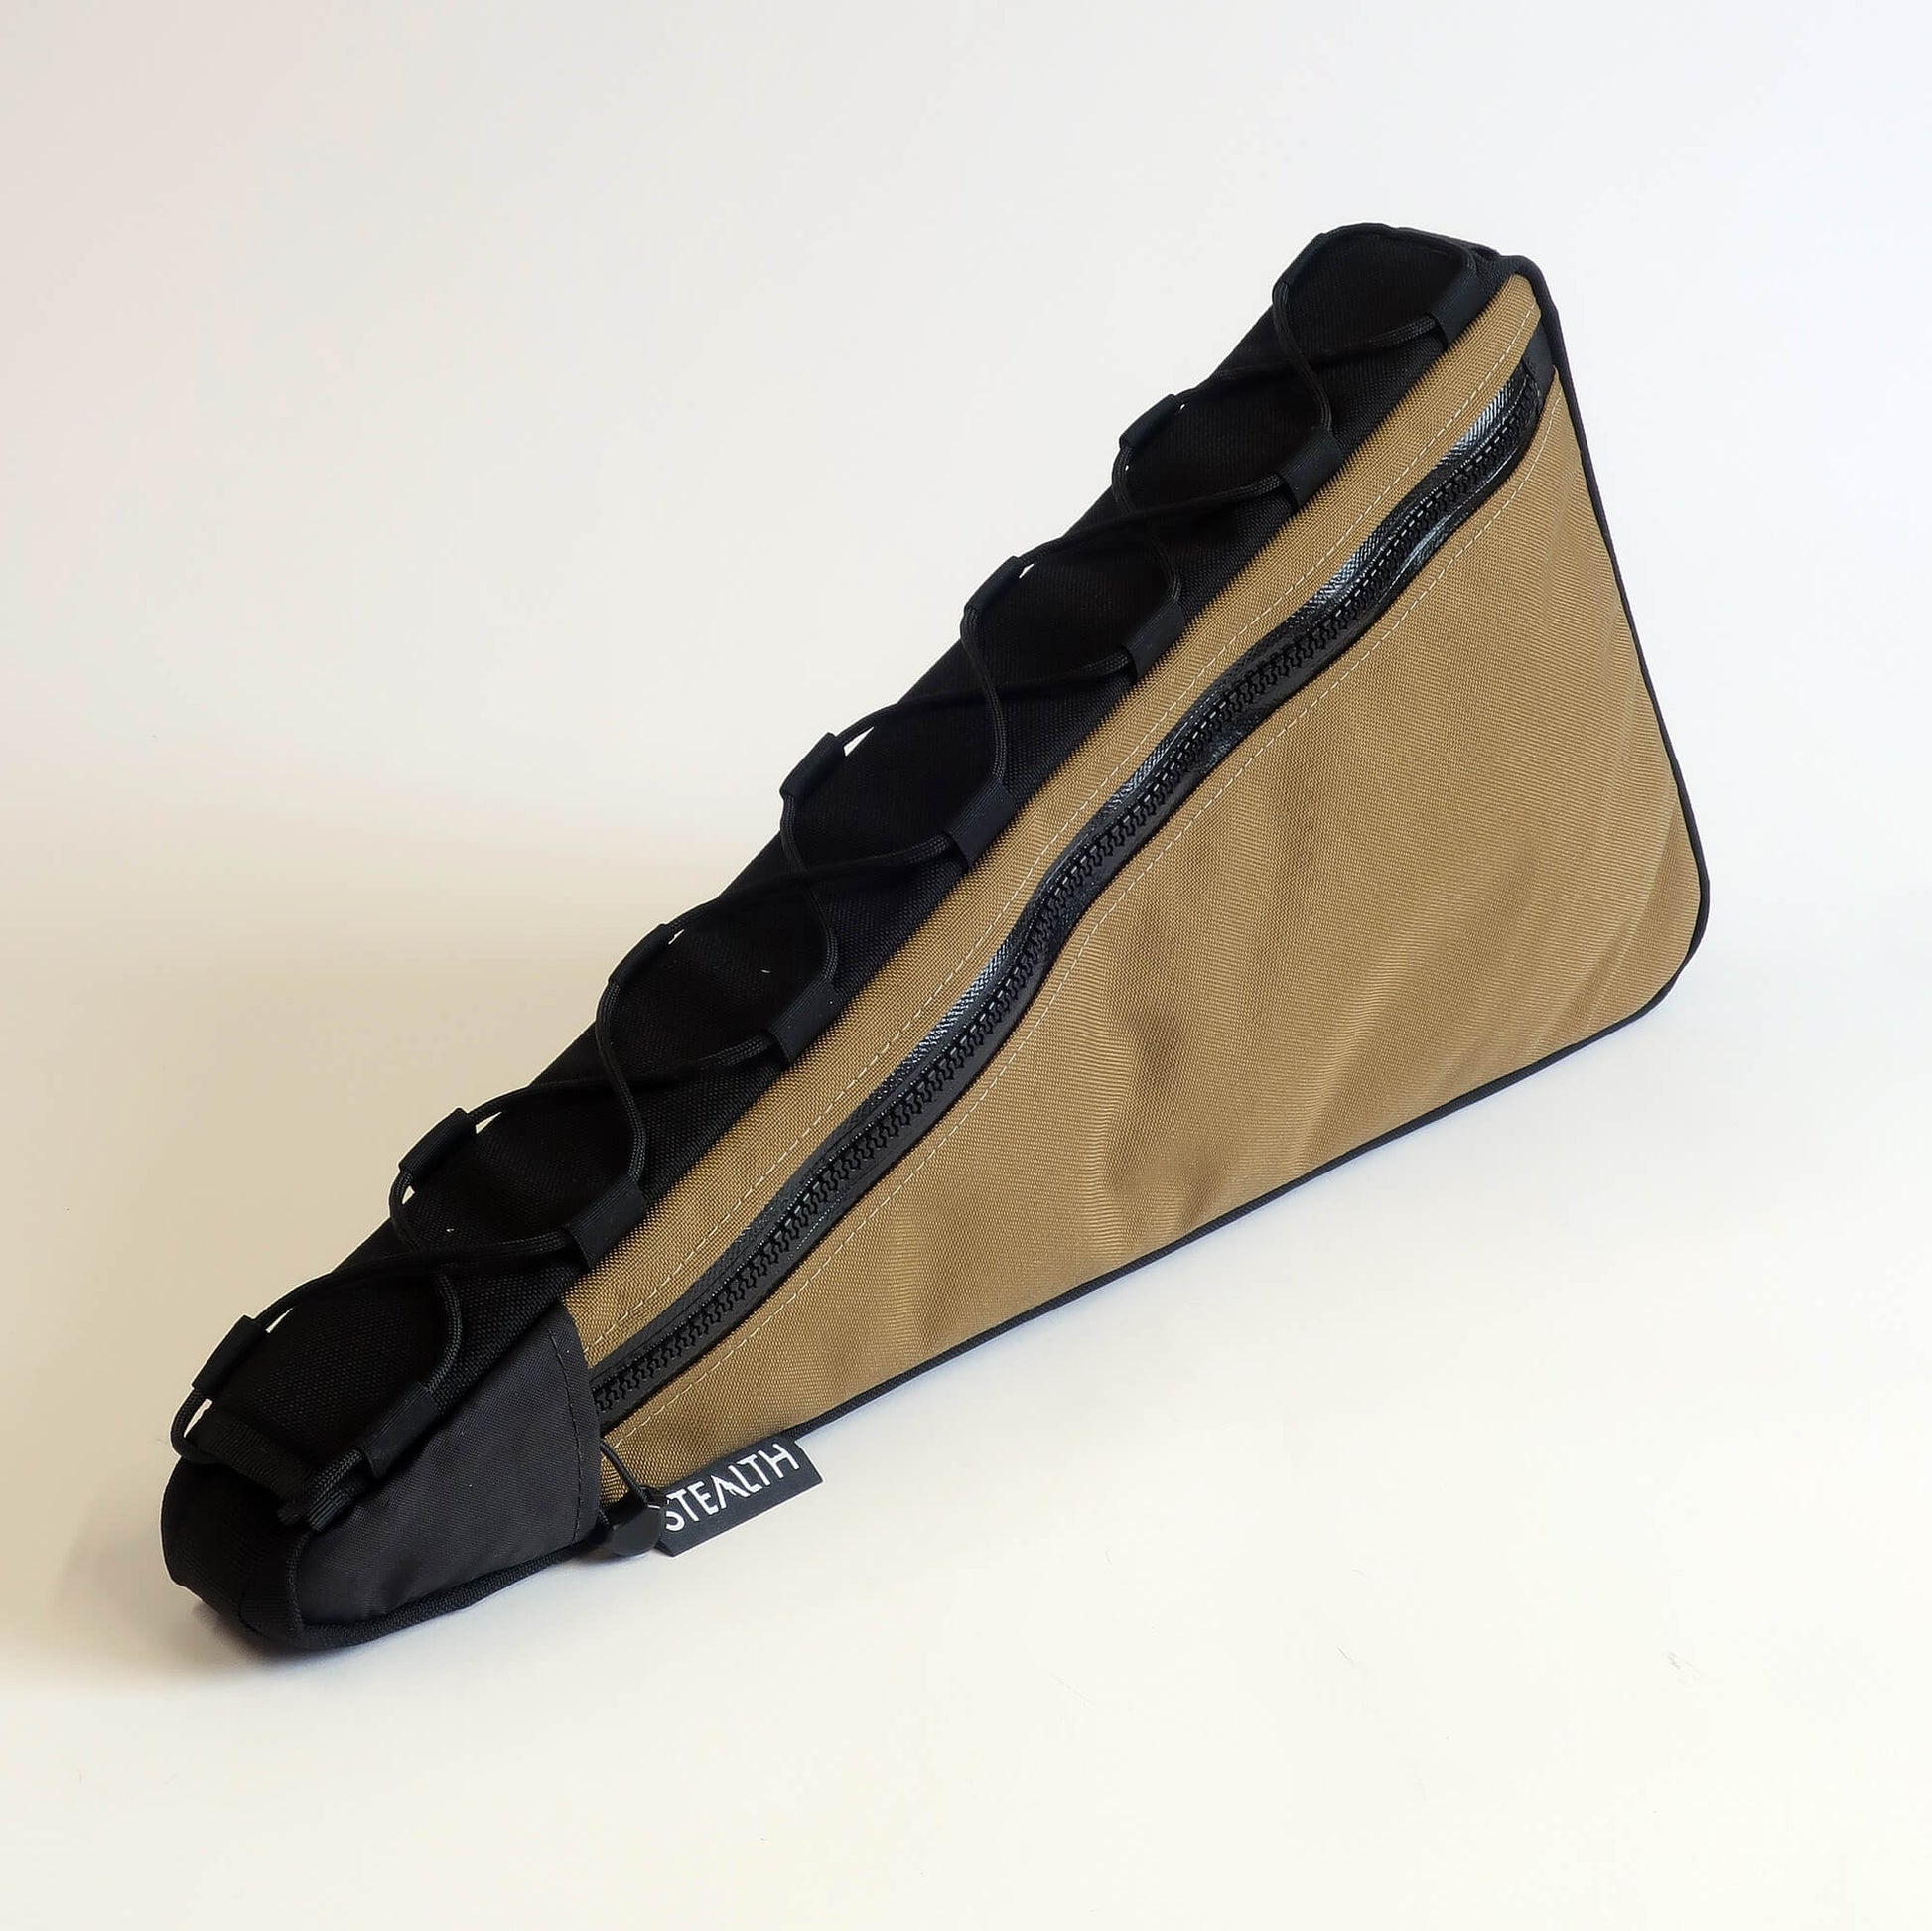 Coyote 1000D Cordura Frame bag with lace up attachement